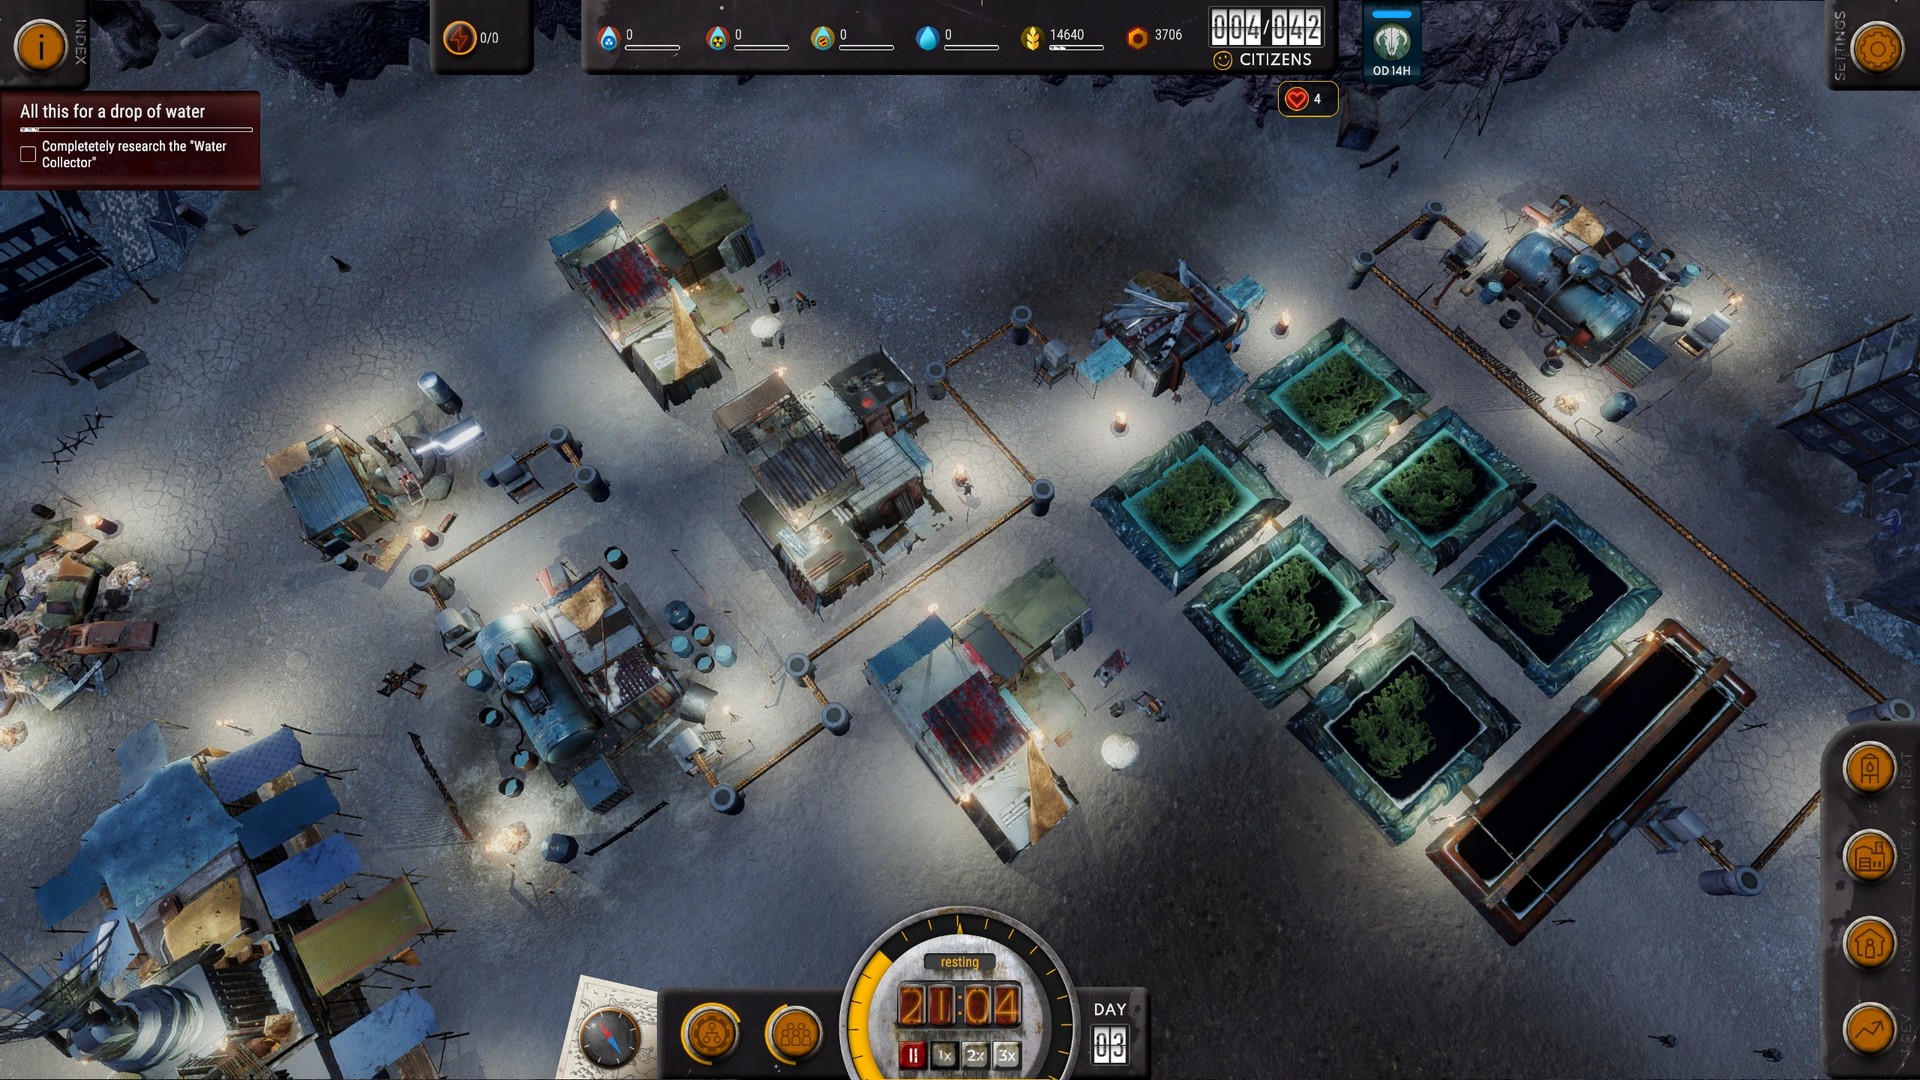 DigitallyDownloaded.net previews Homeseek, a new post-apocalyptic survival simulation on PC